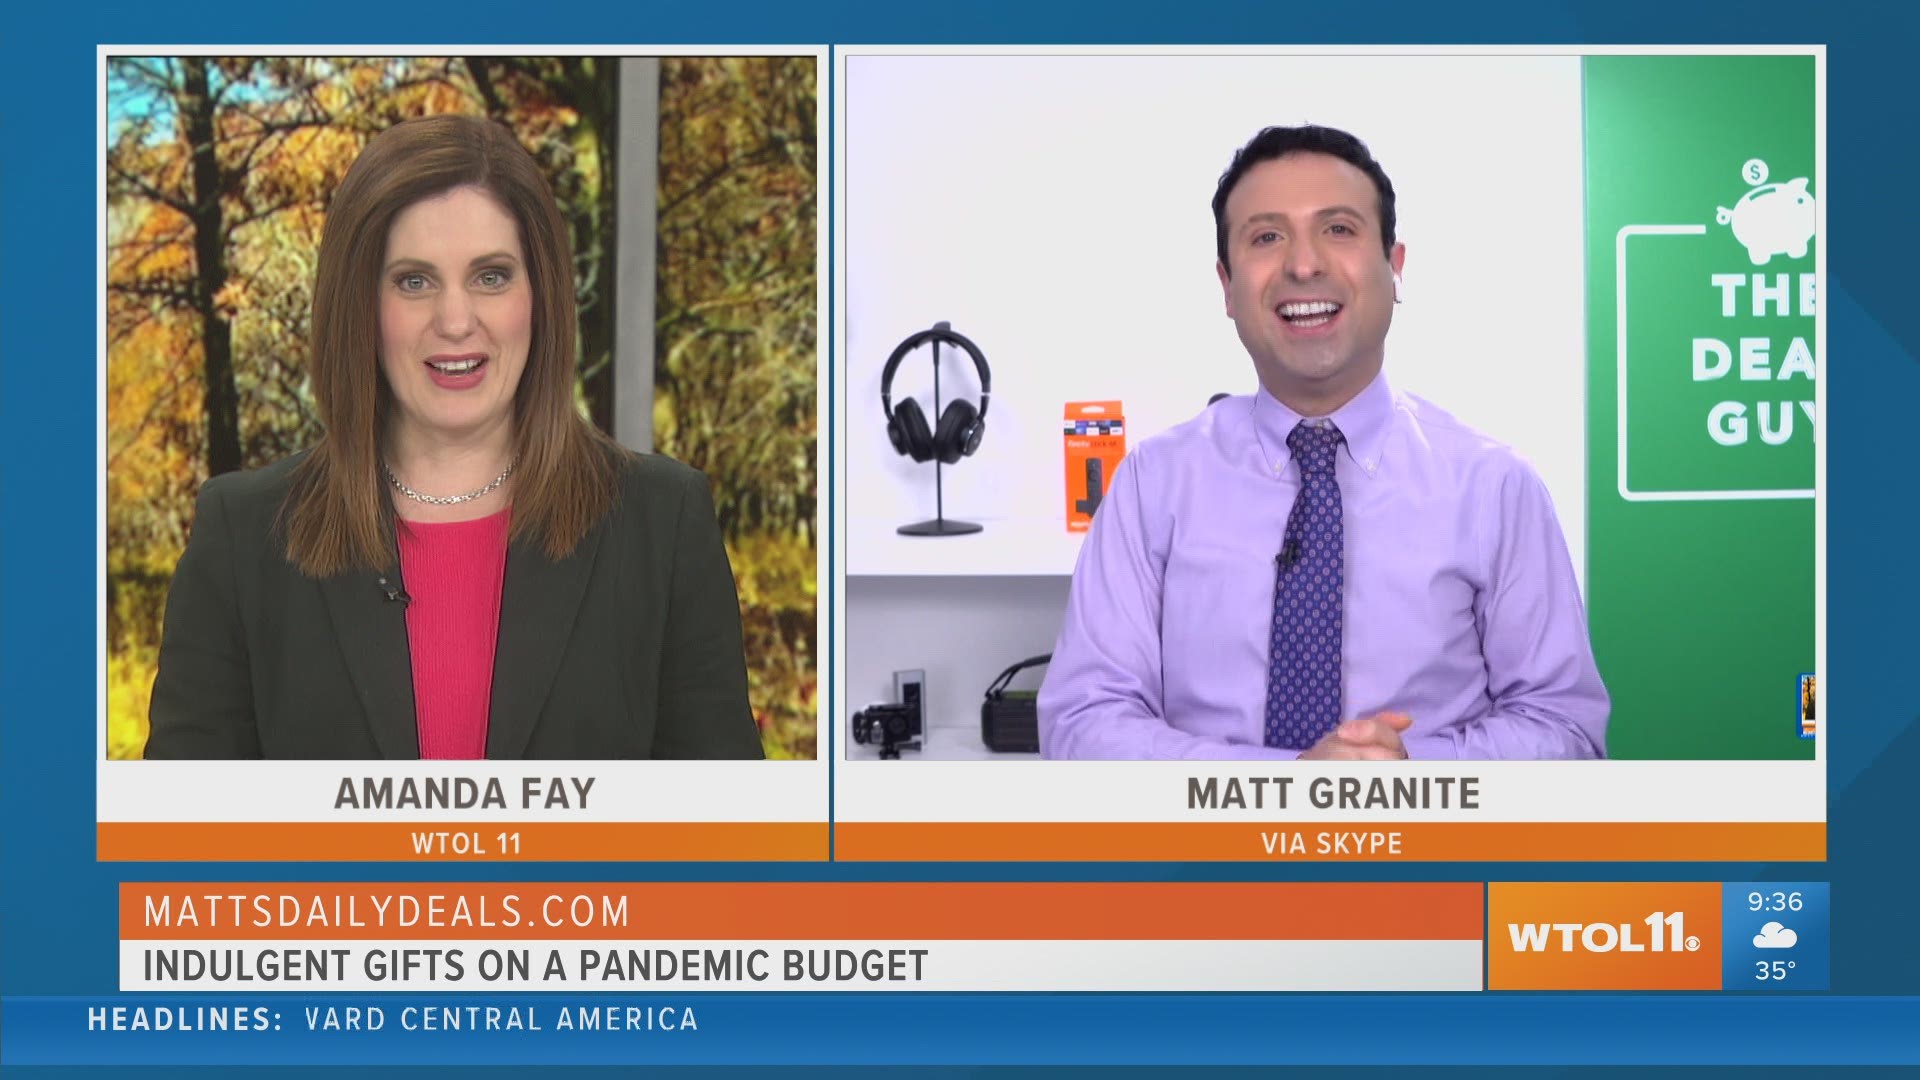 'The Deal Guy' Matt Granite helps you get more bang for your buck as you plan to get your gifts for the holiday season.